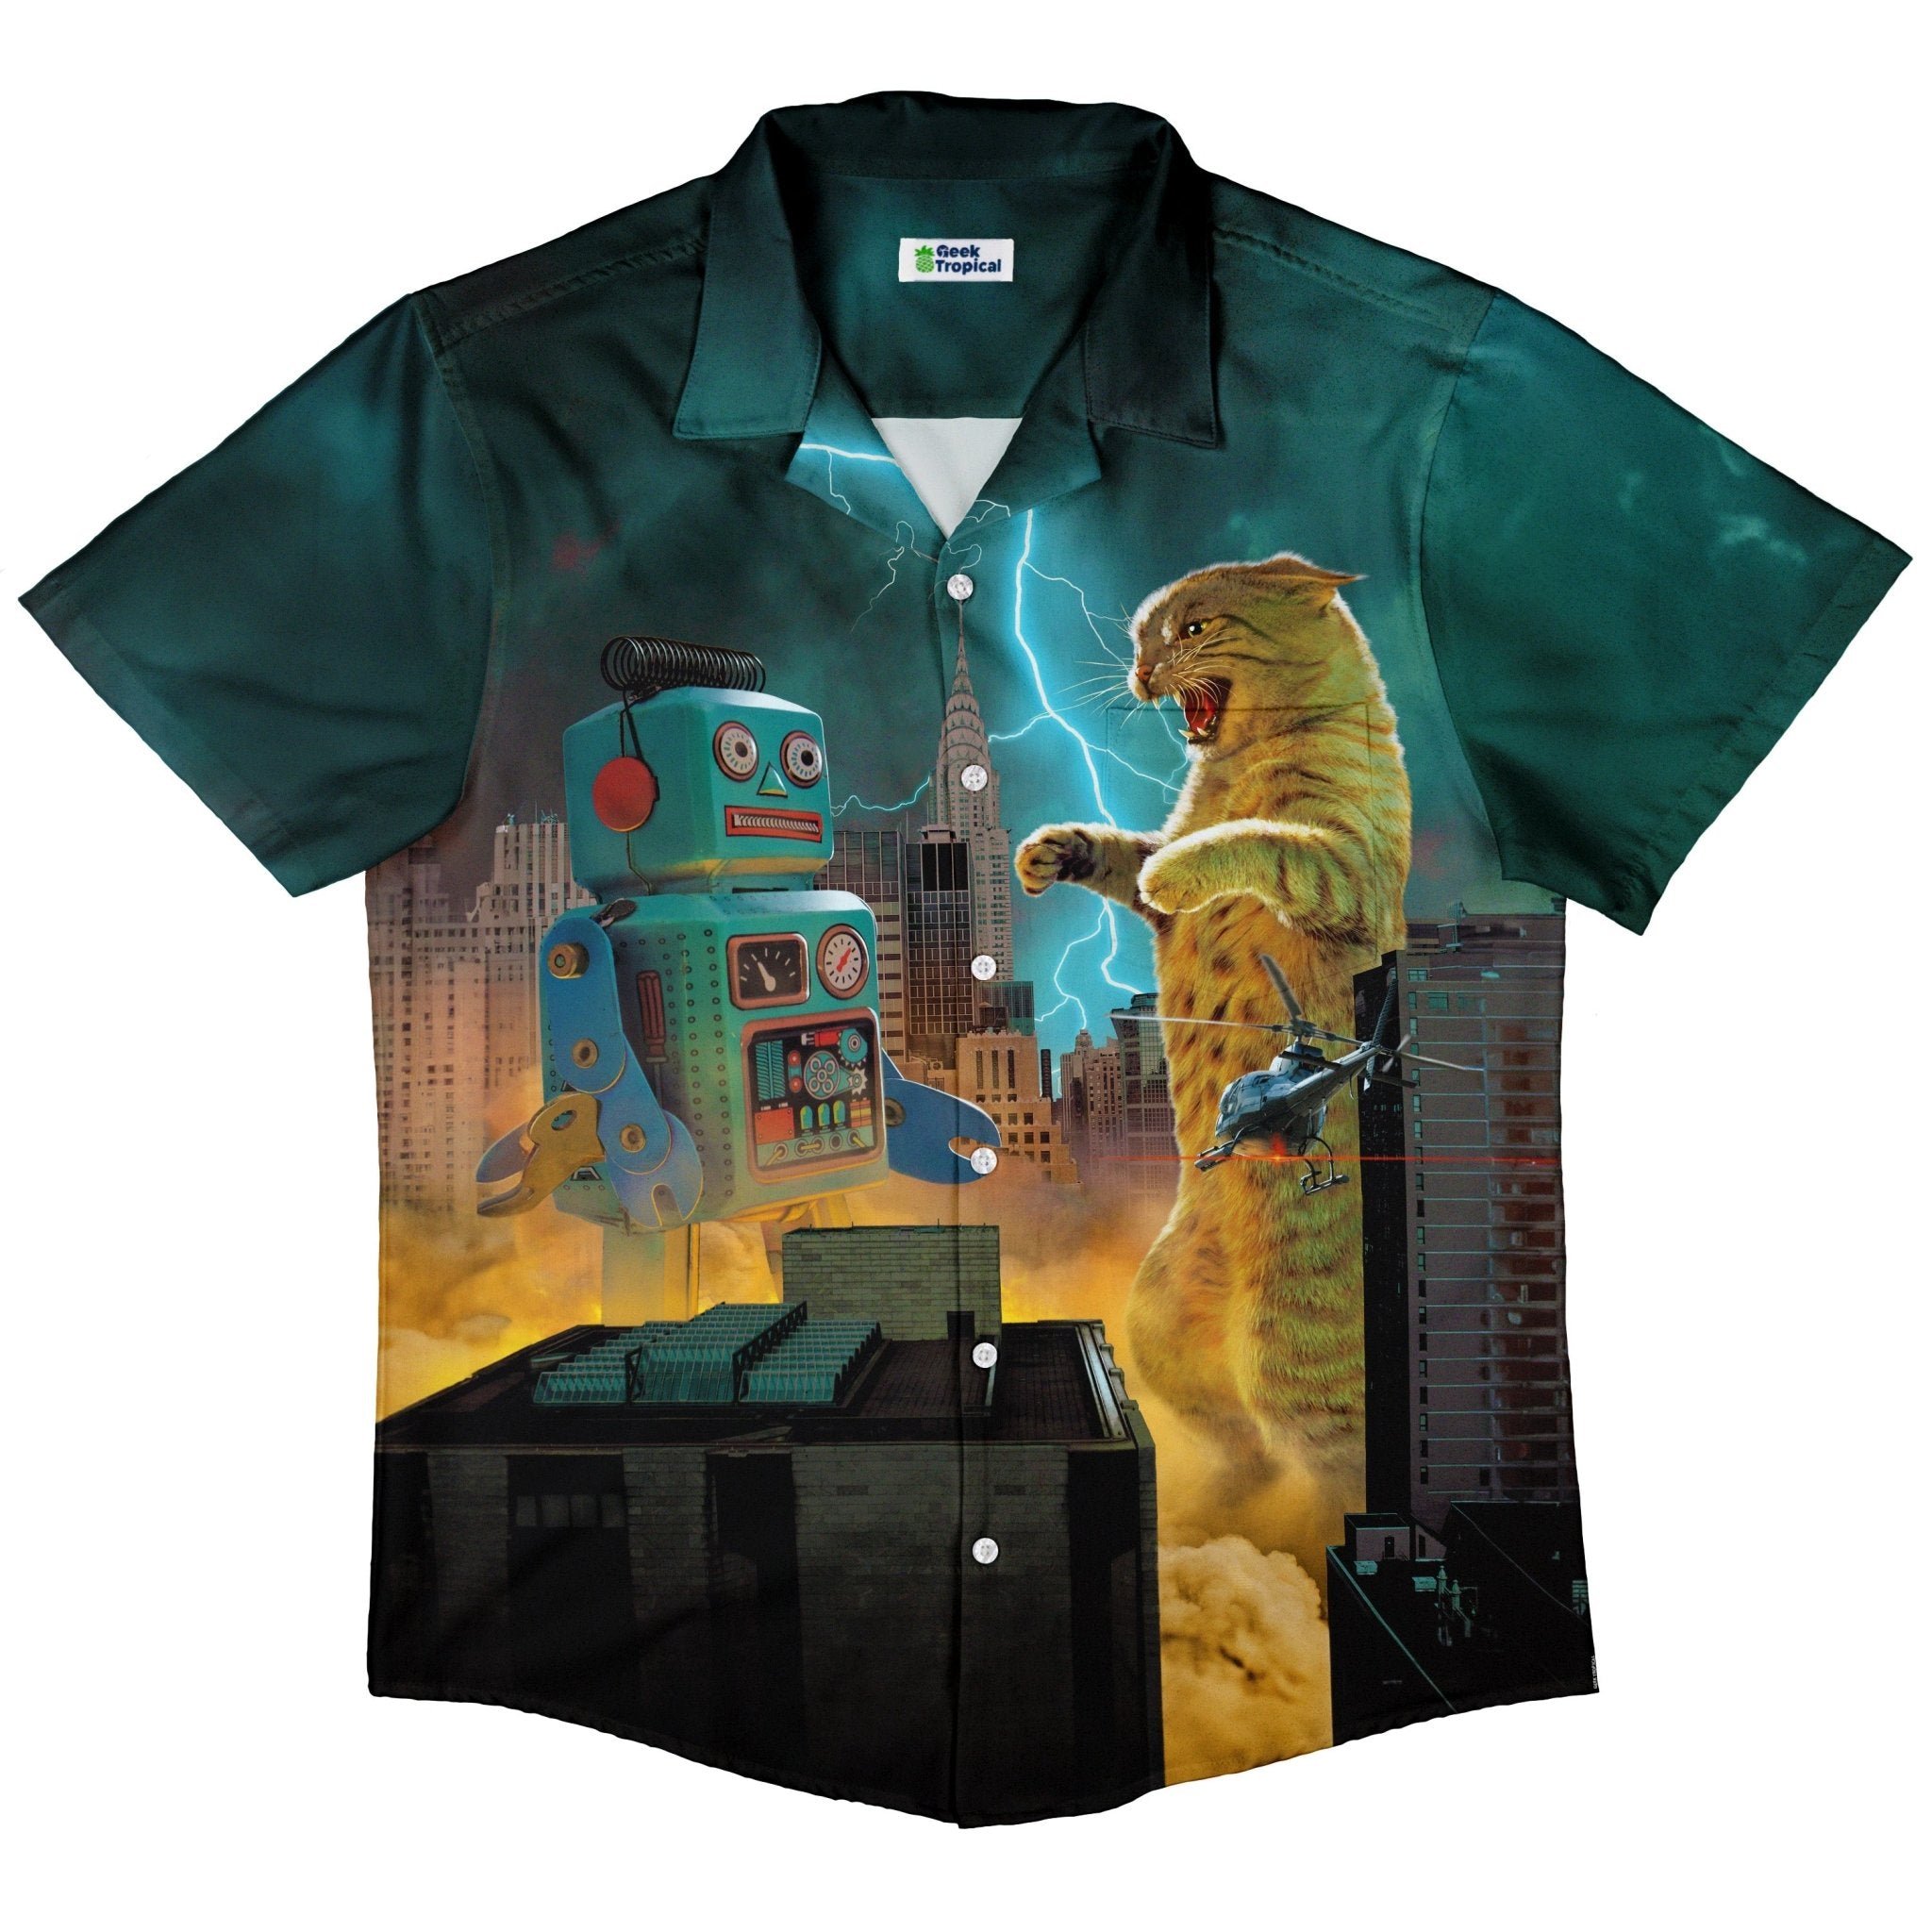 Catzilla vs Robot Button Up Shirt - adult sizing - Animal Patterns - Design by Vincent Hie